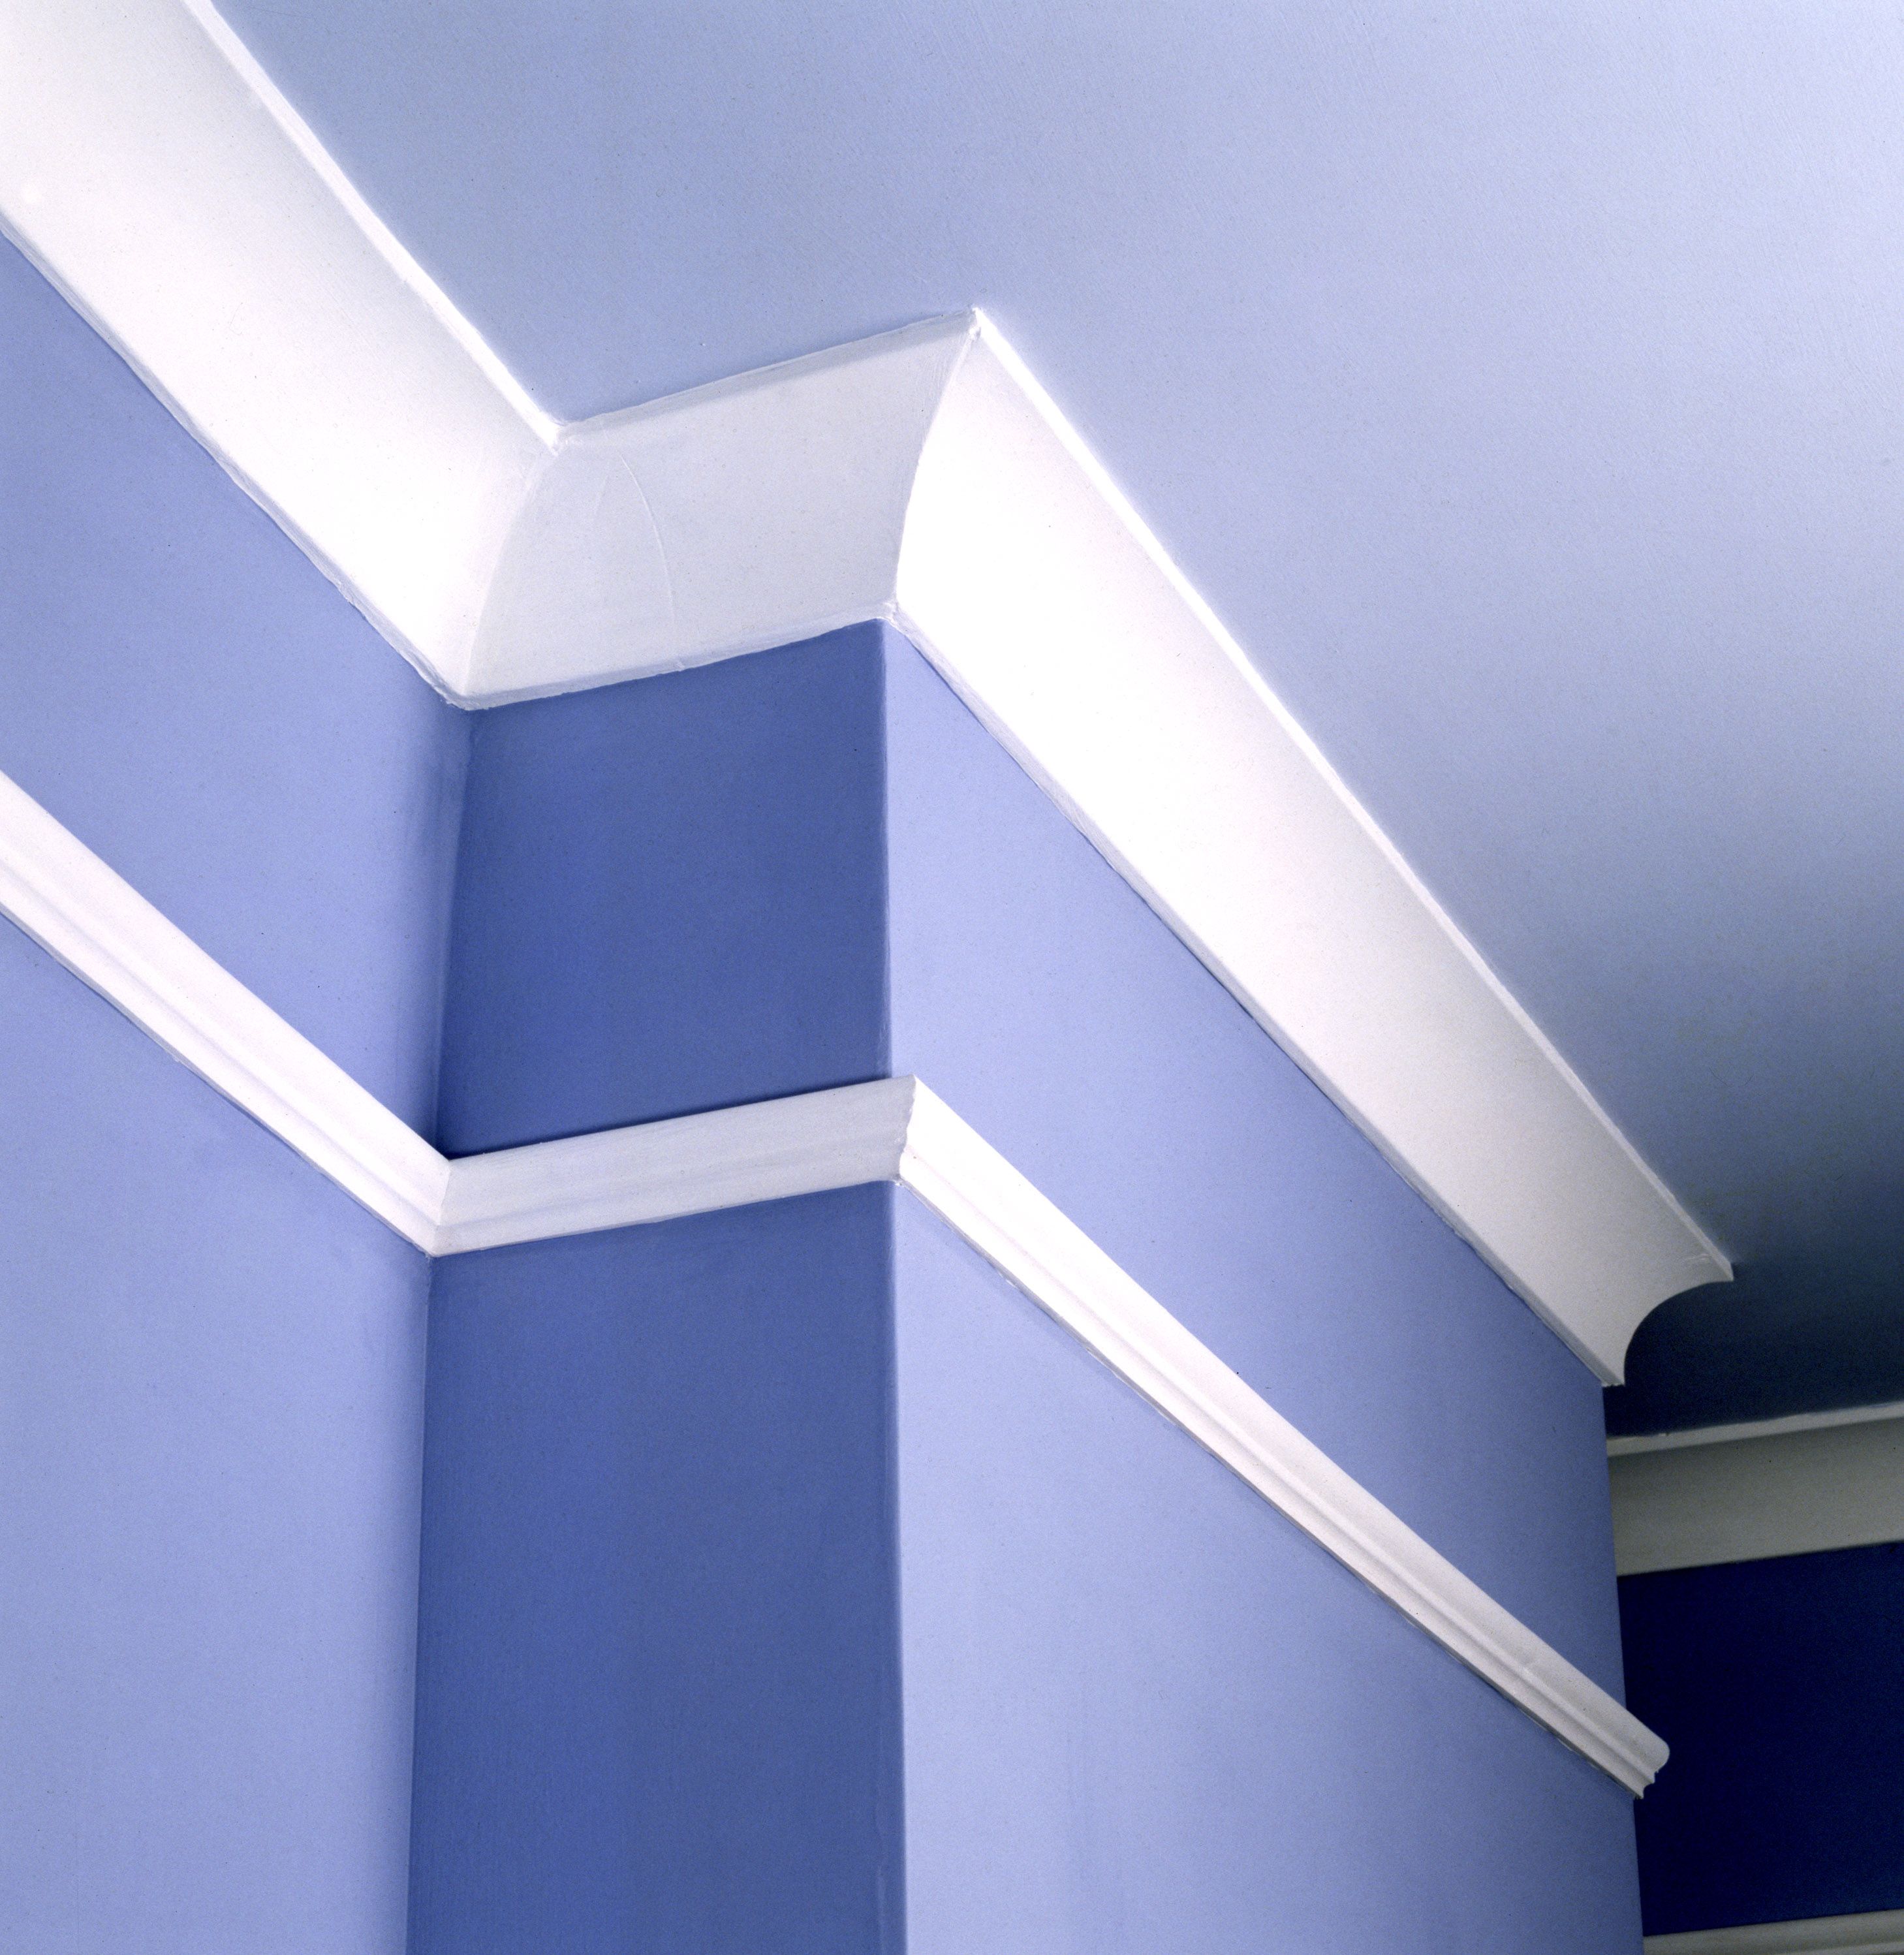 types of trim boards